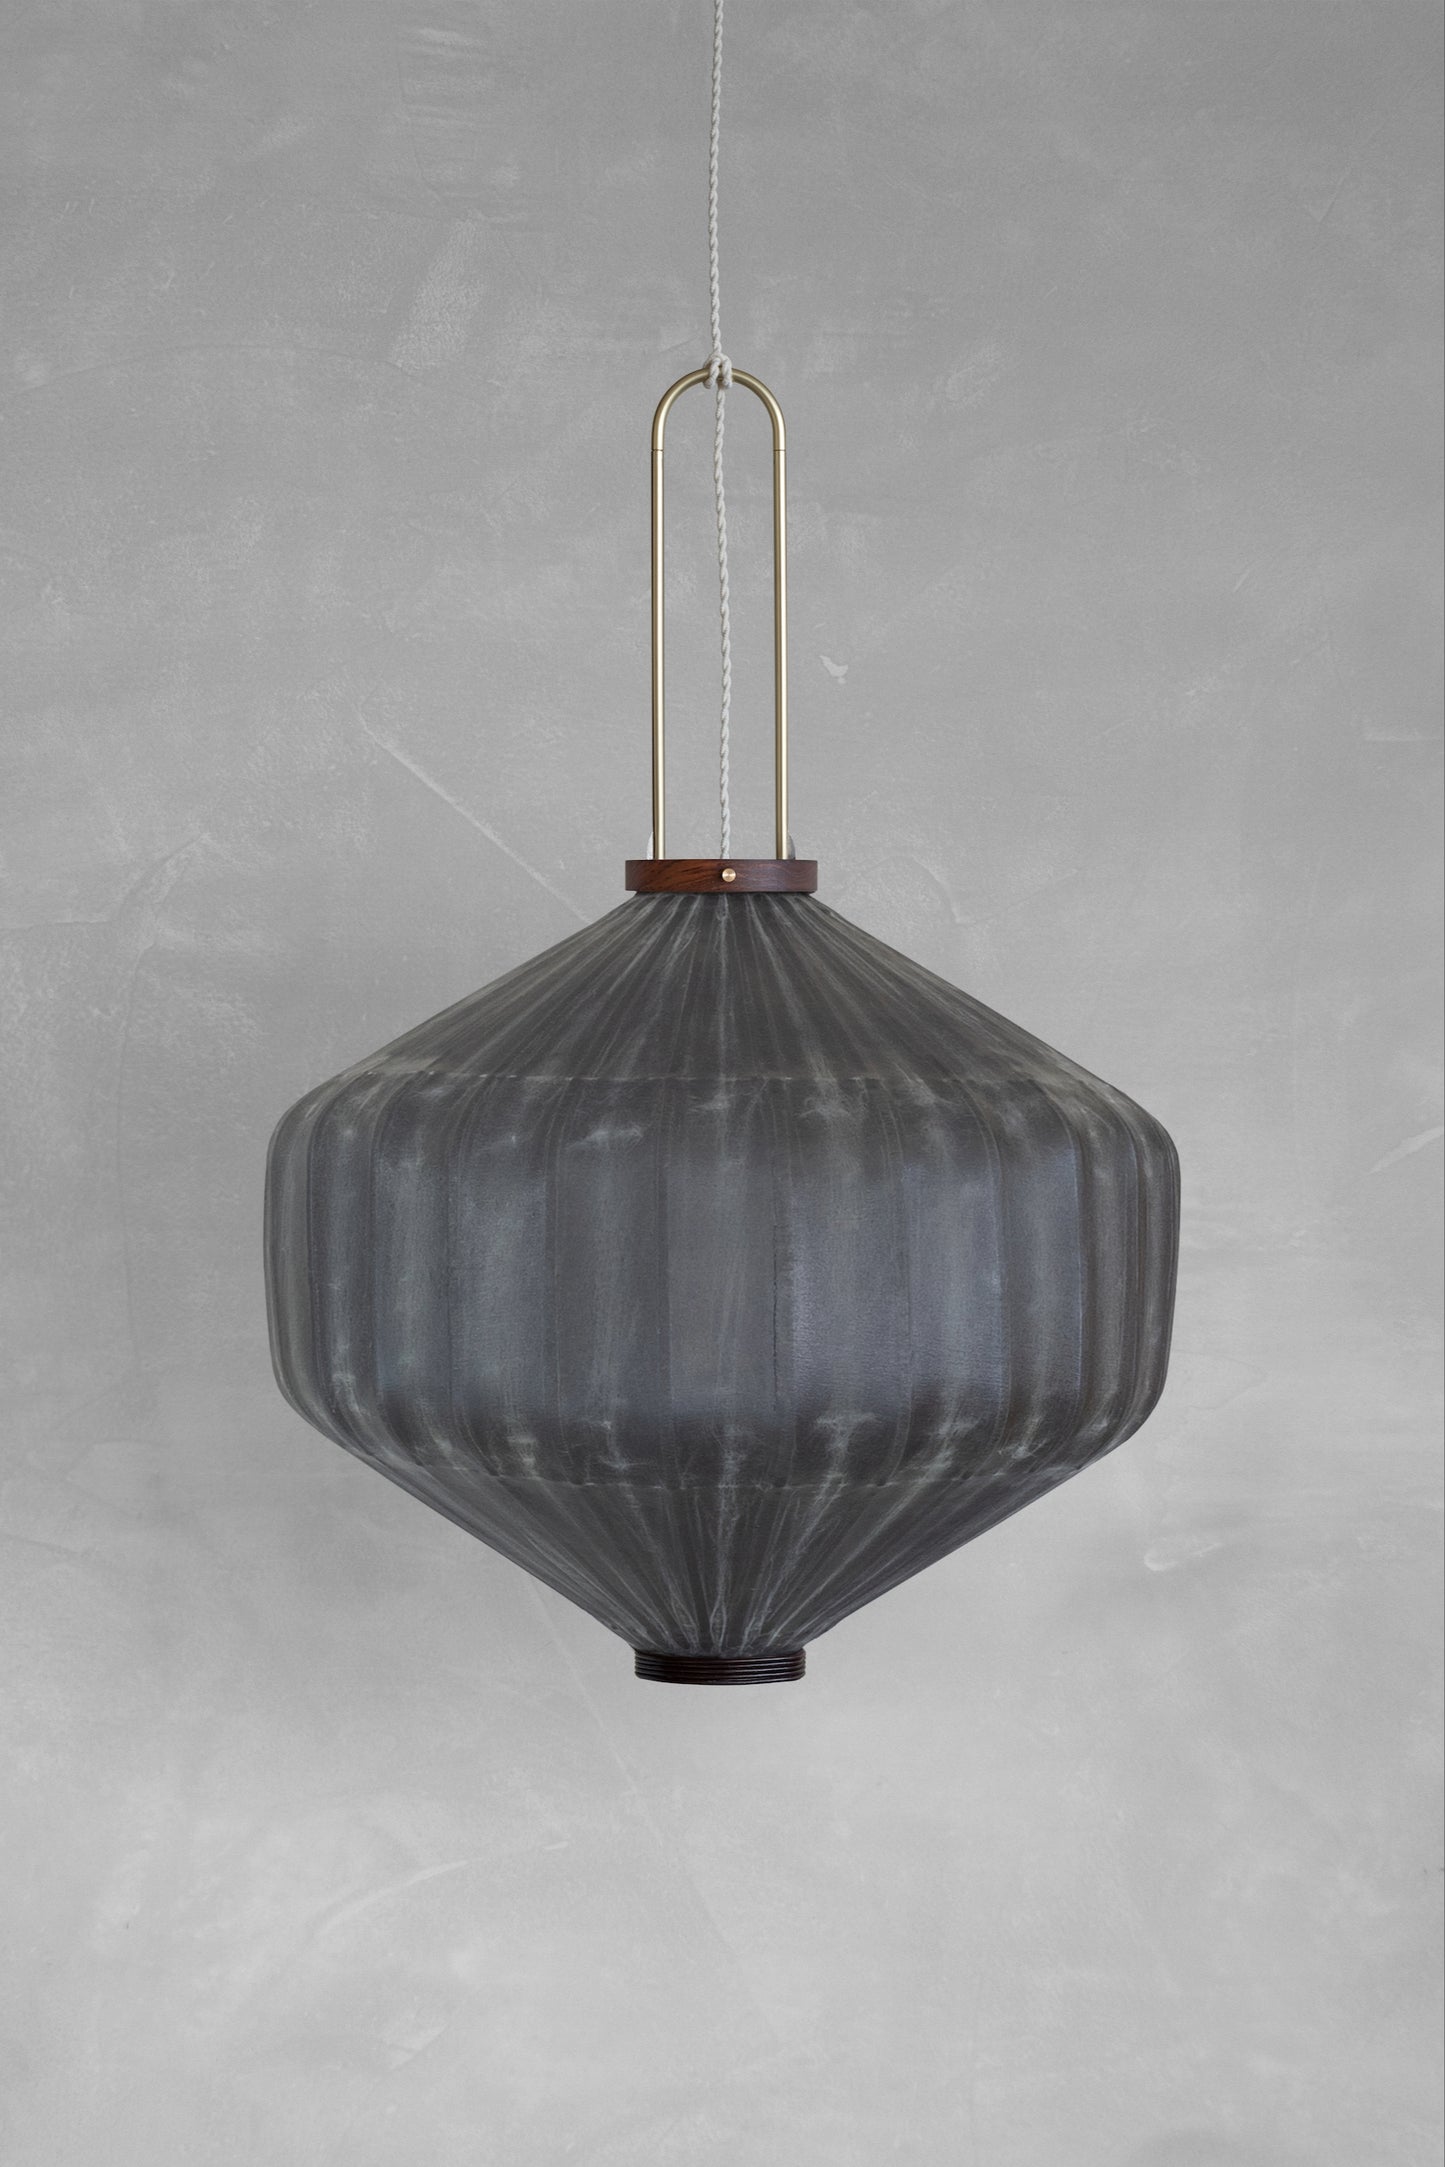 The Tuolo shaped version of the Heritage Lantern Black by Taiwan Lantern.